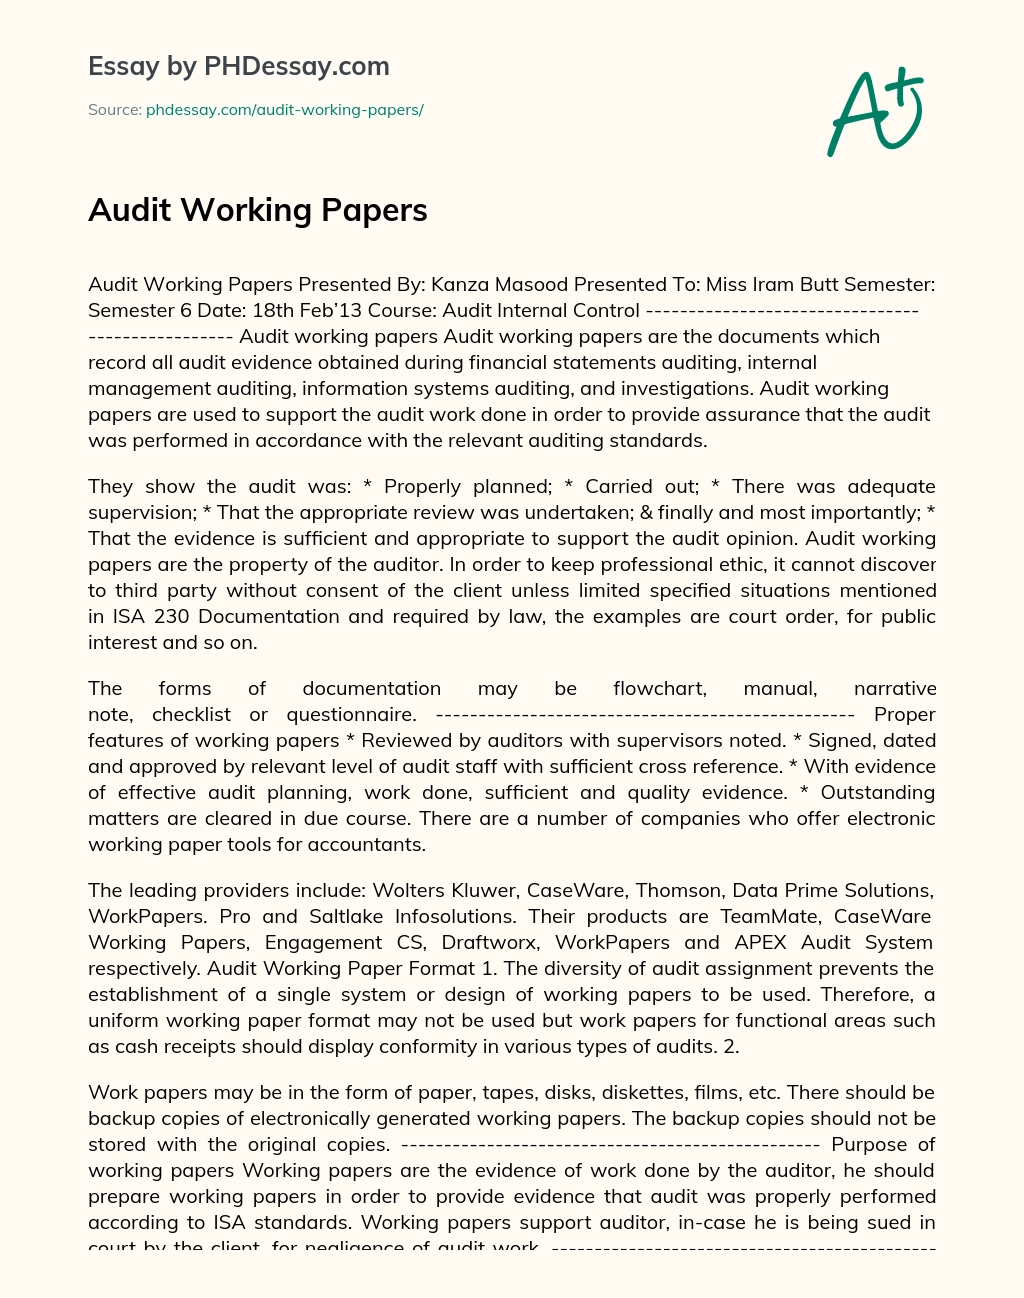 Audit Working Papers - PHDessay.com